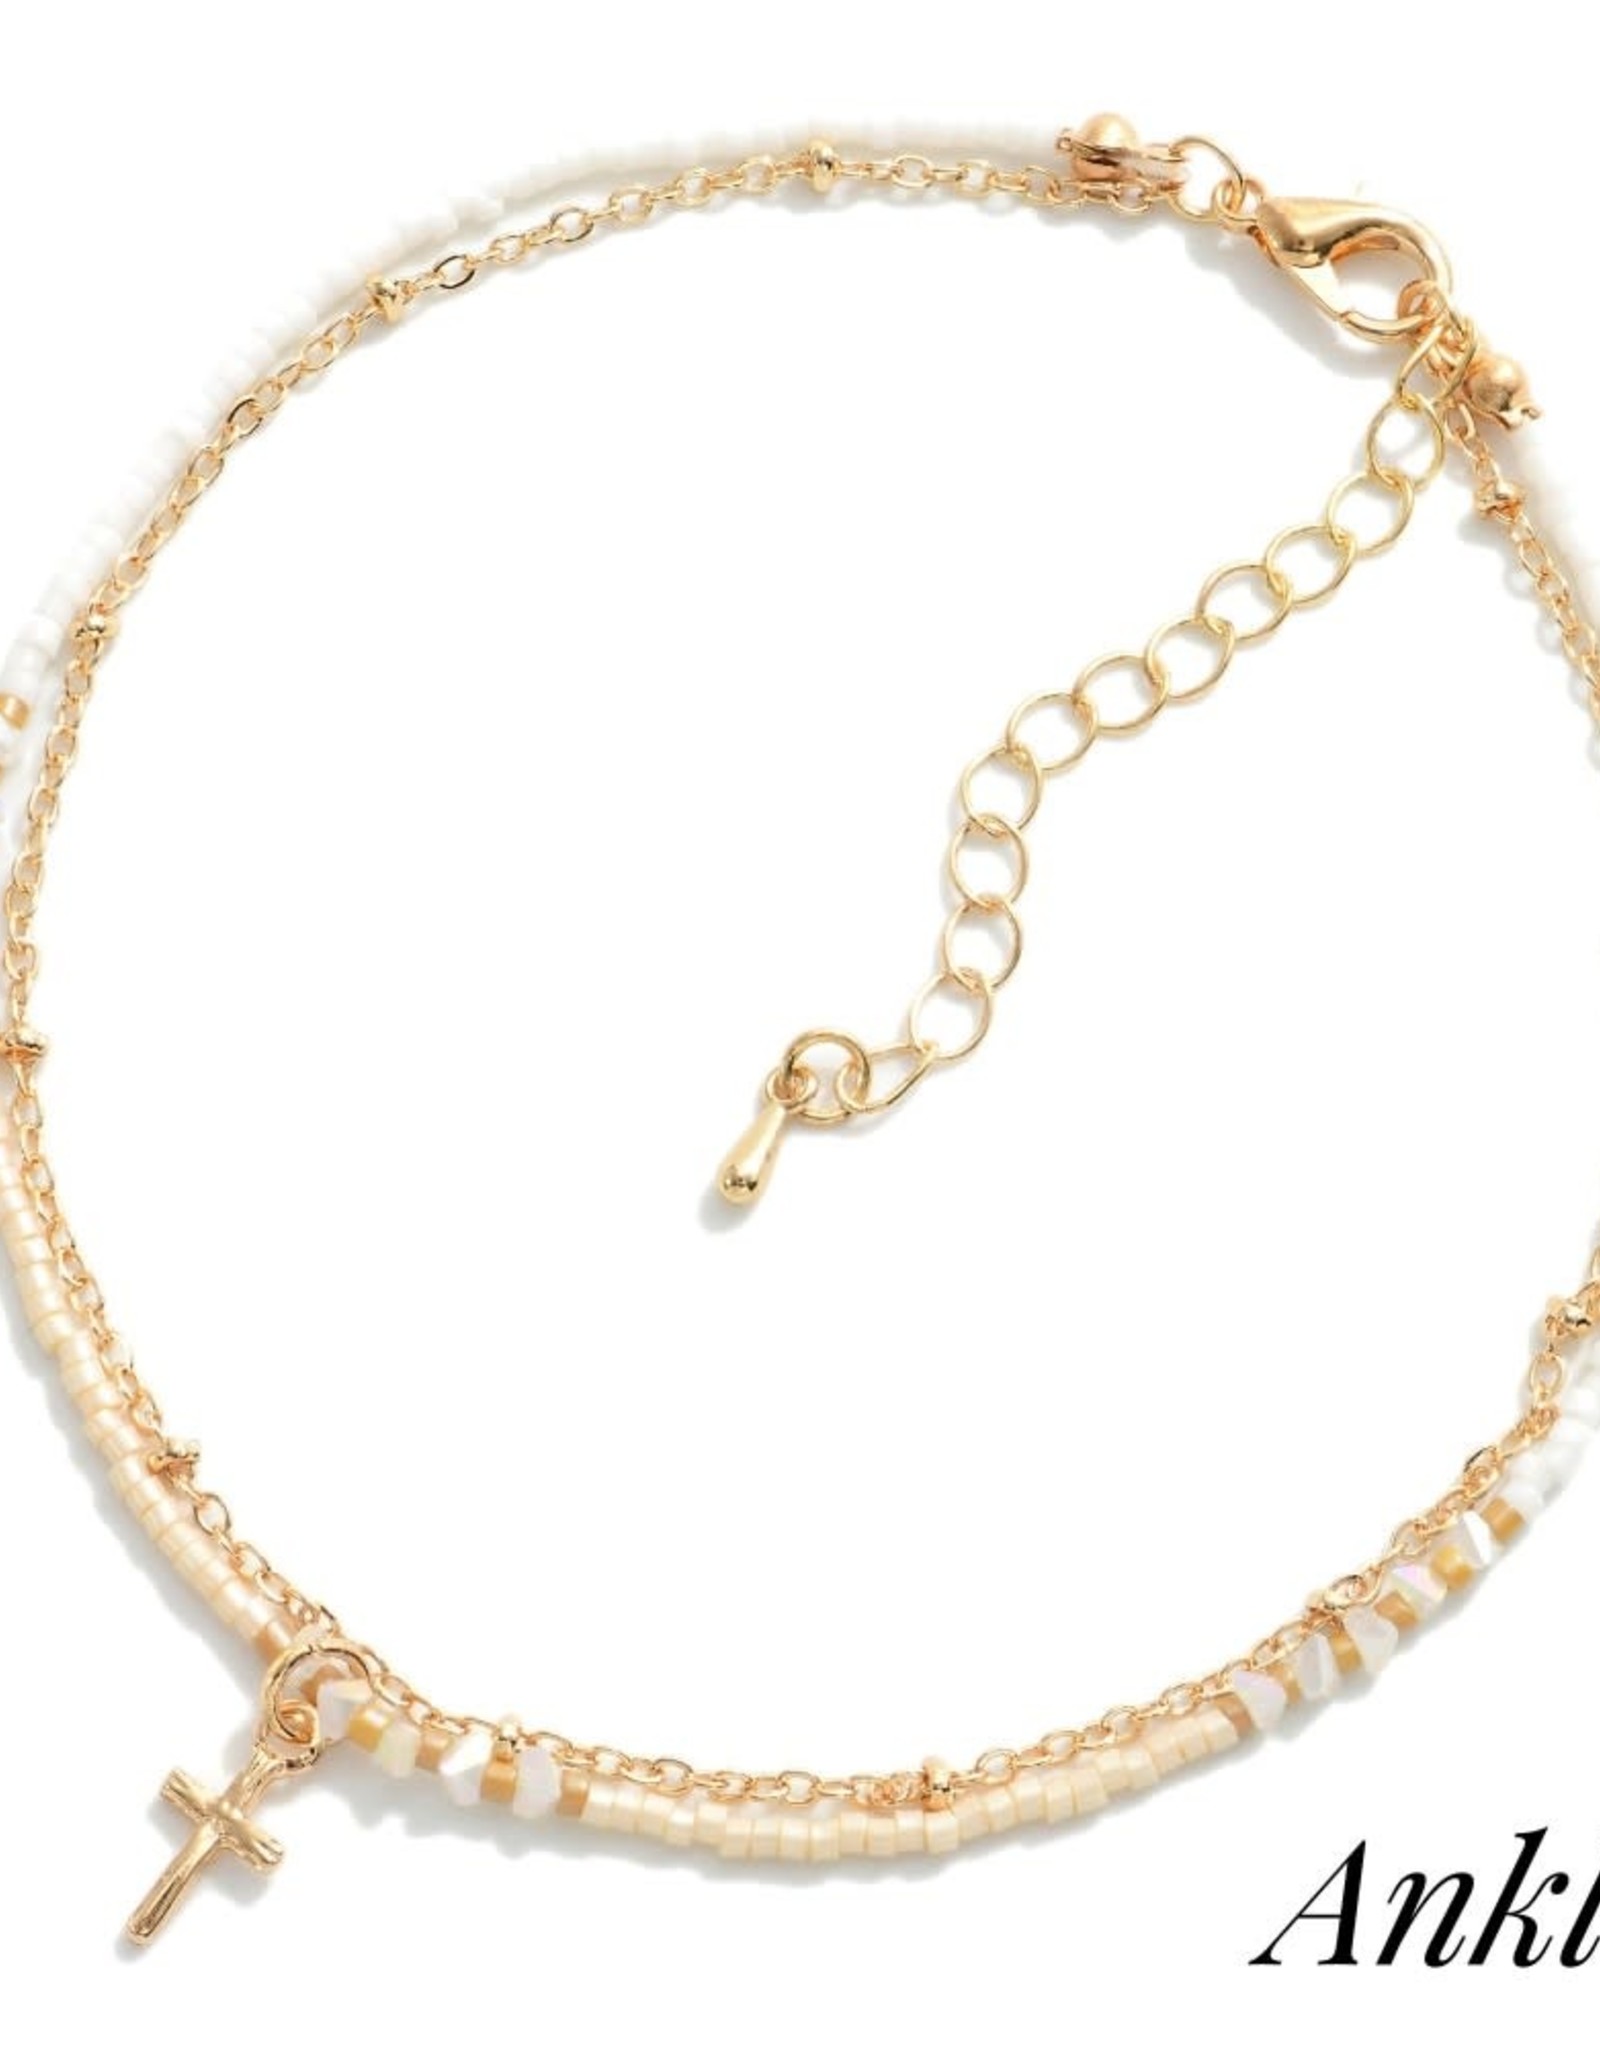 judson 435843 - Dainty Beaded Anklet Featuring Gold Tone Chain And Cross Charm - Gold/White